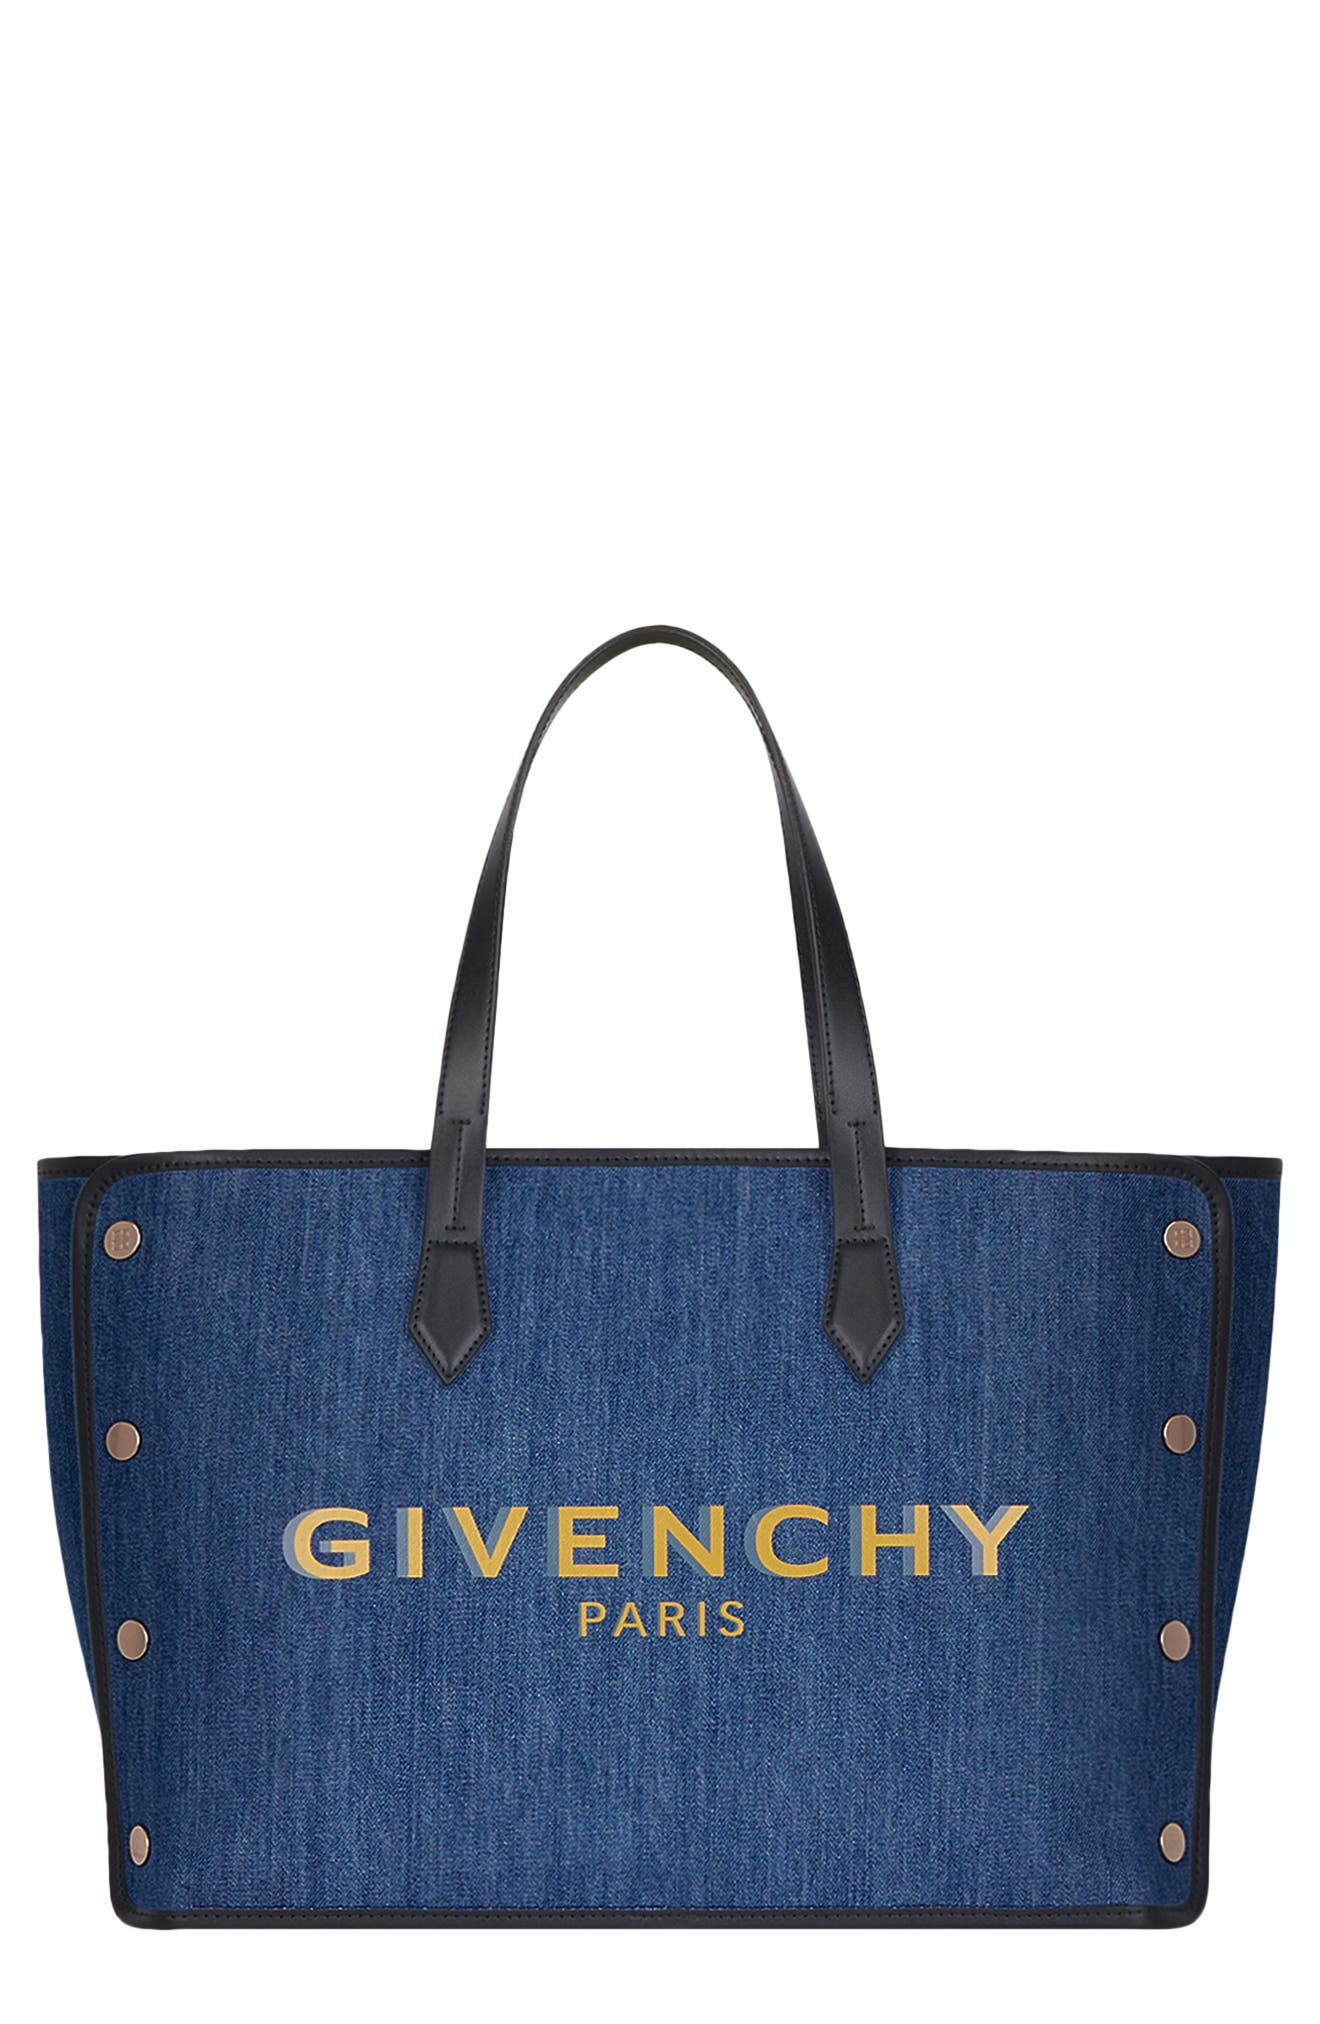 givenchy bags nordstrom